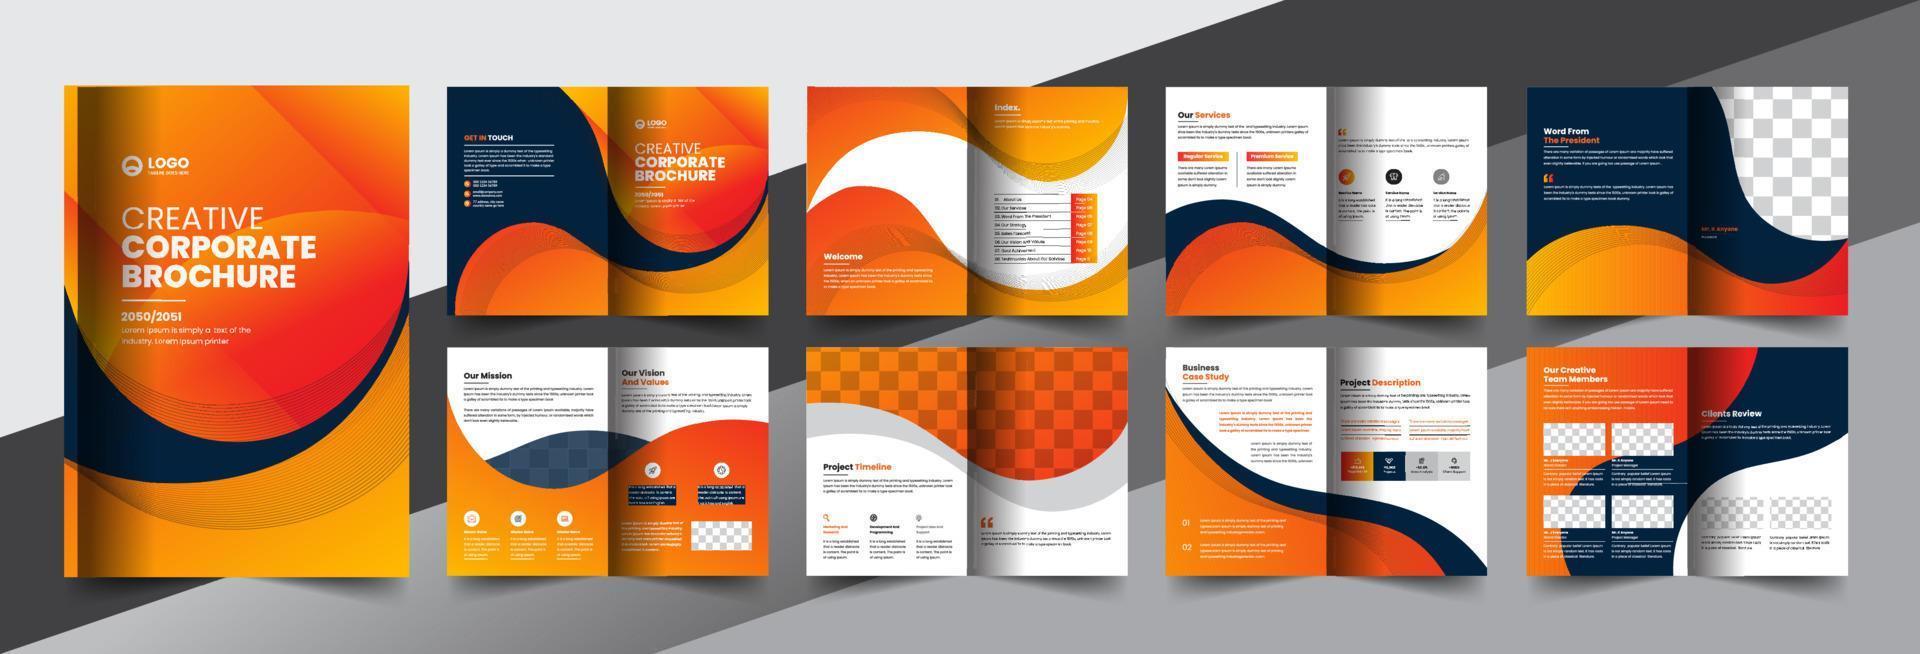 corporate company profile brochure annual report booklet business proposal layout concept design vector